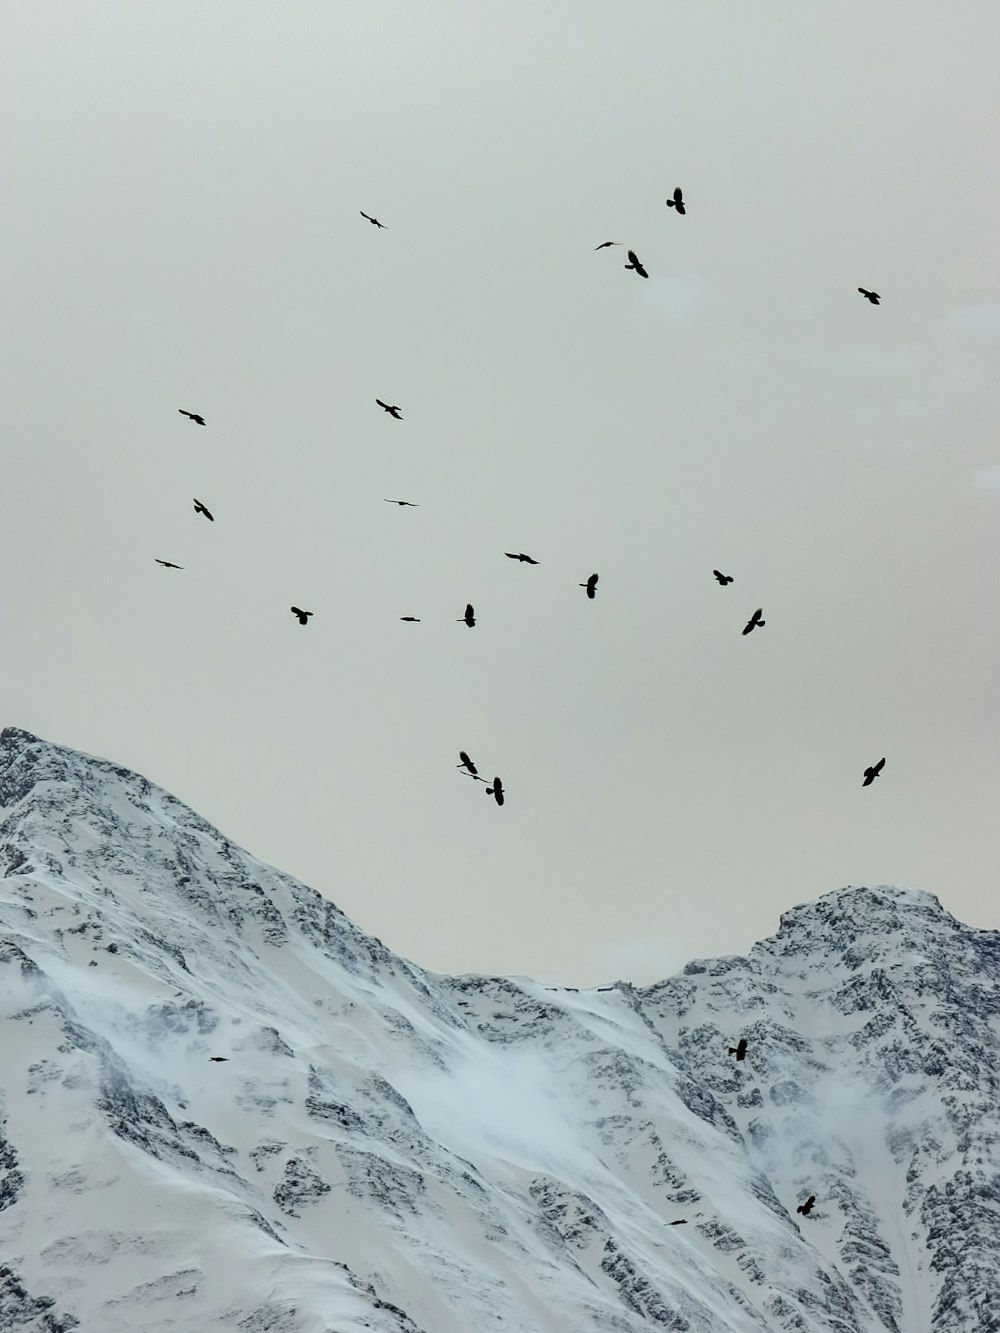 a flock of birds flying over a snowy mountain